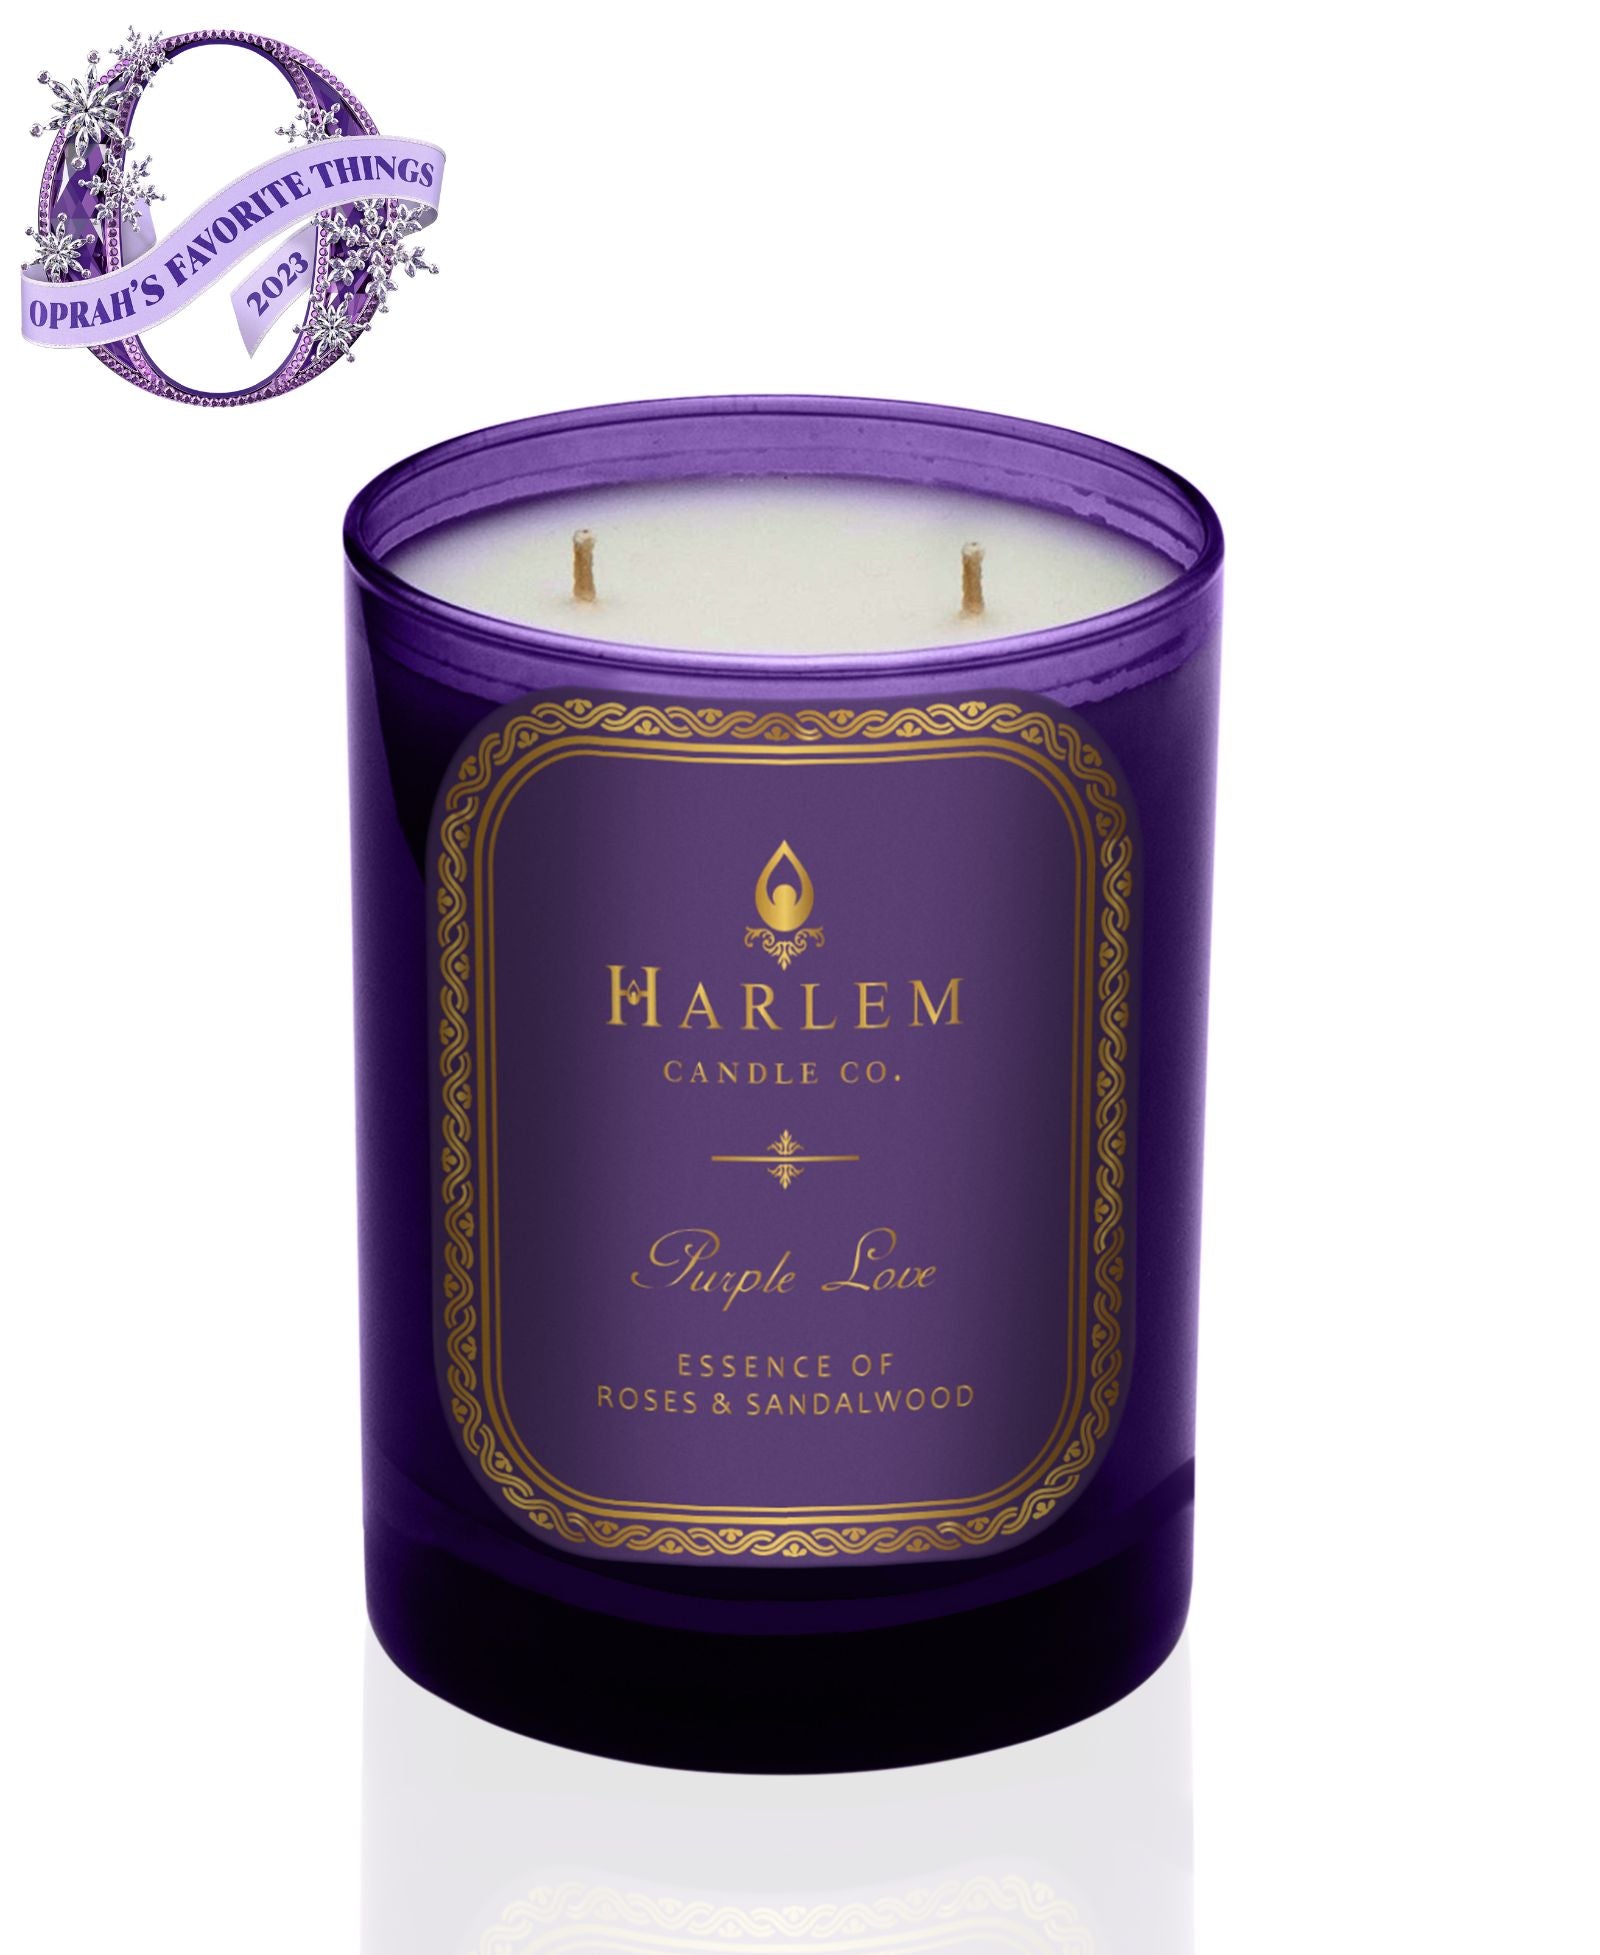 This is an image of our purple love candle in case any purple glass with a purple label. This is also one of Oprah's favorite things for 2023.